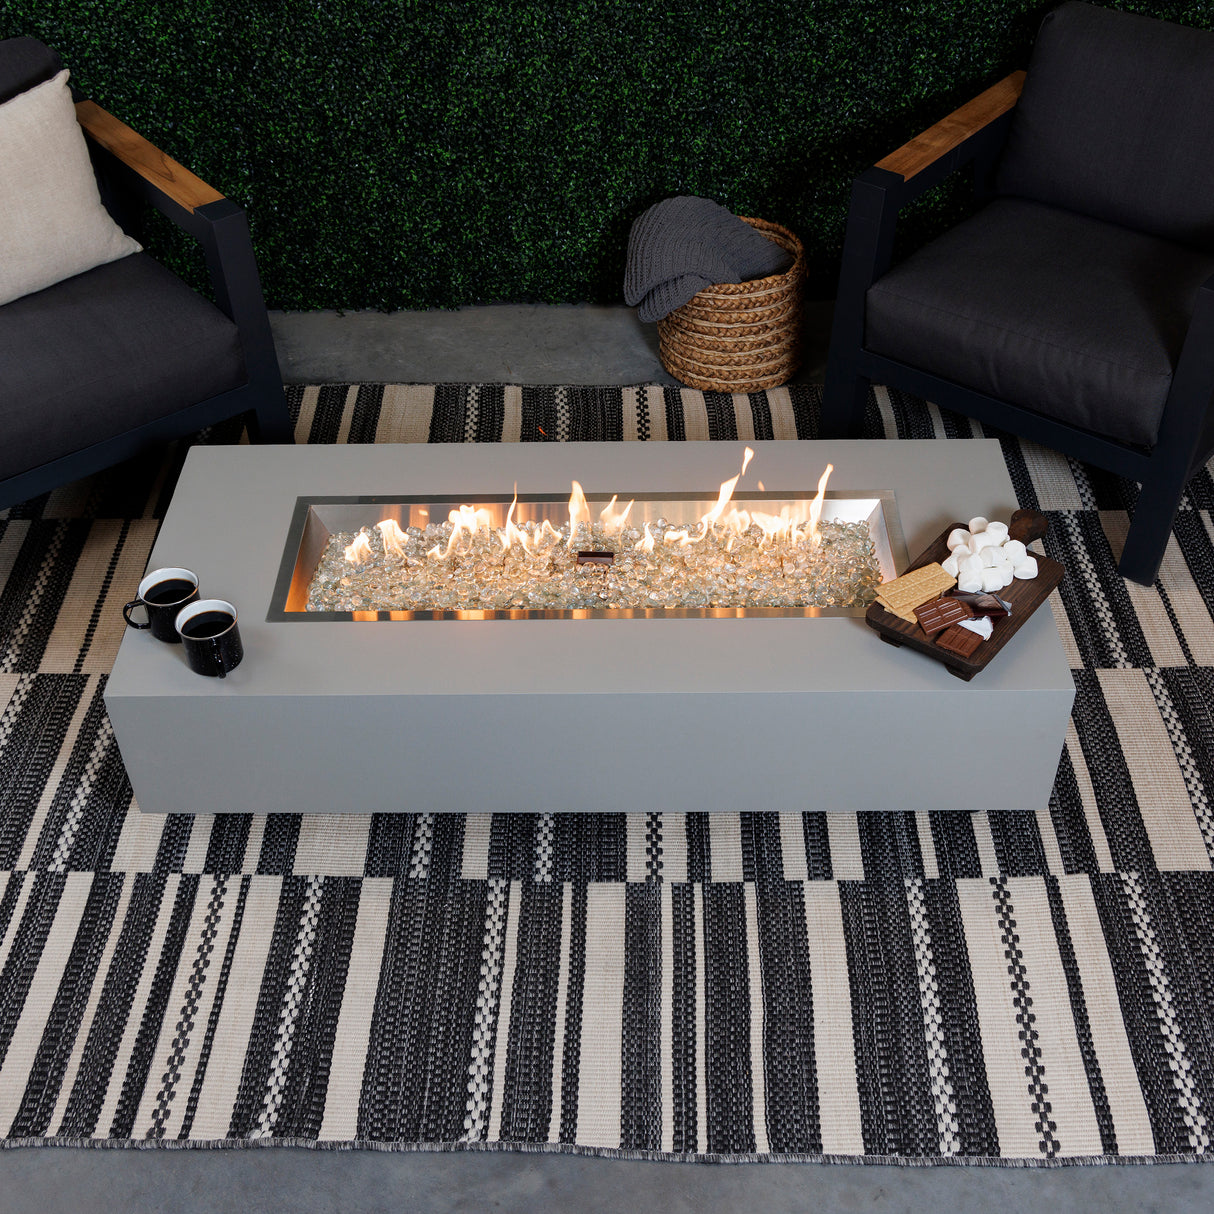 A top view of the Harbor View Rectangular Gas Fire Pit Table with food and drink on the sides around the fire